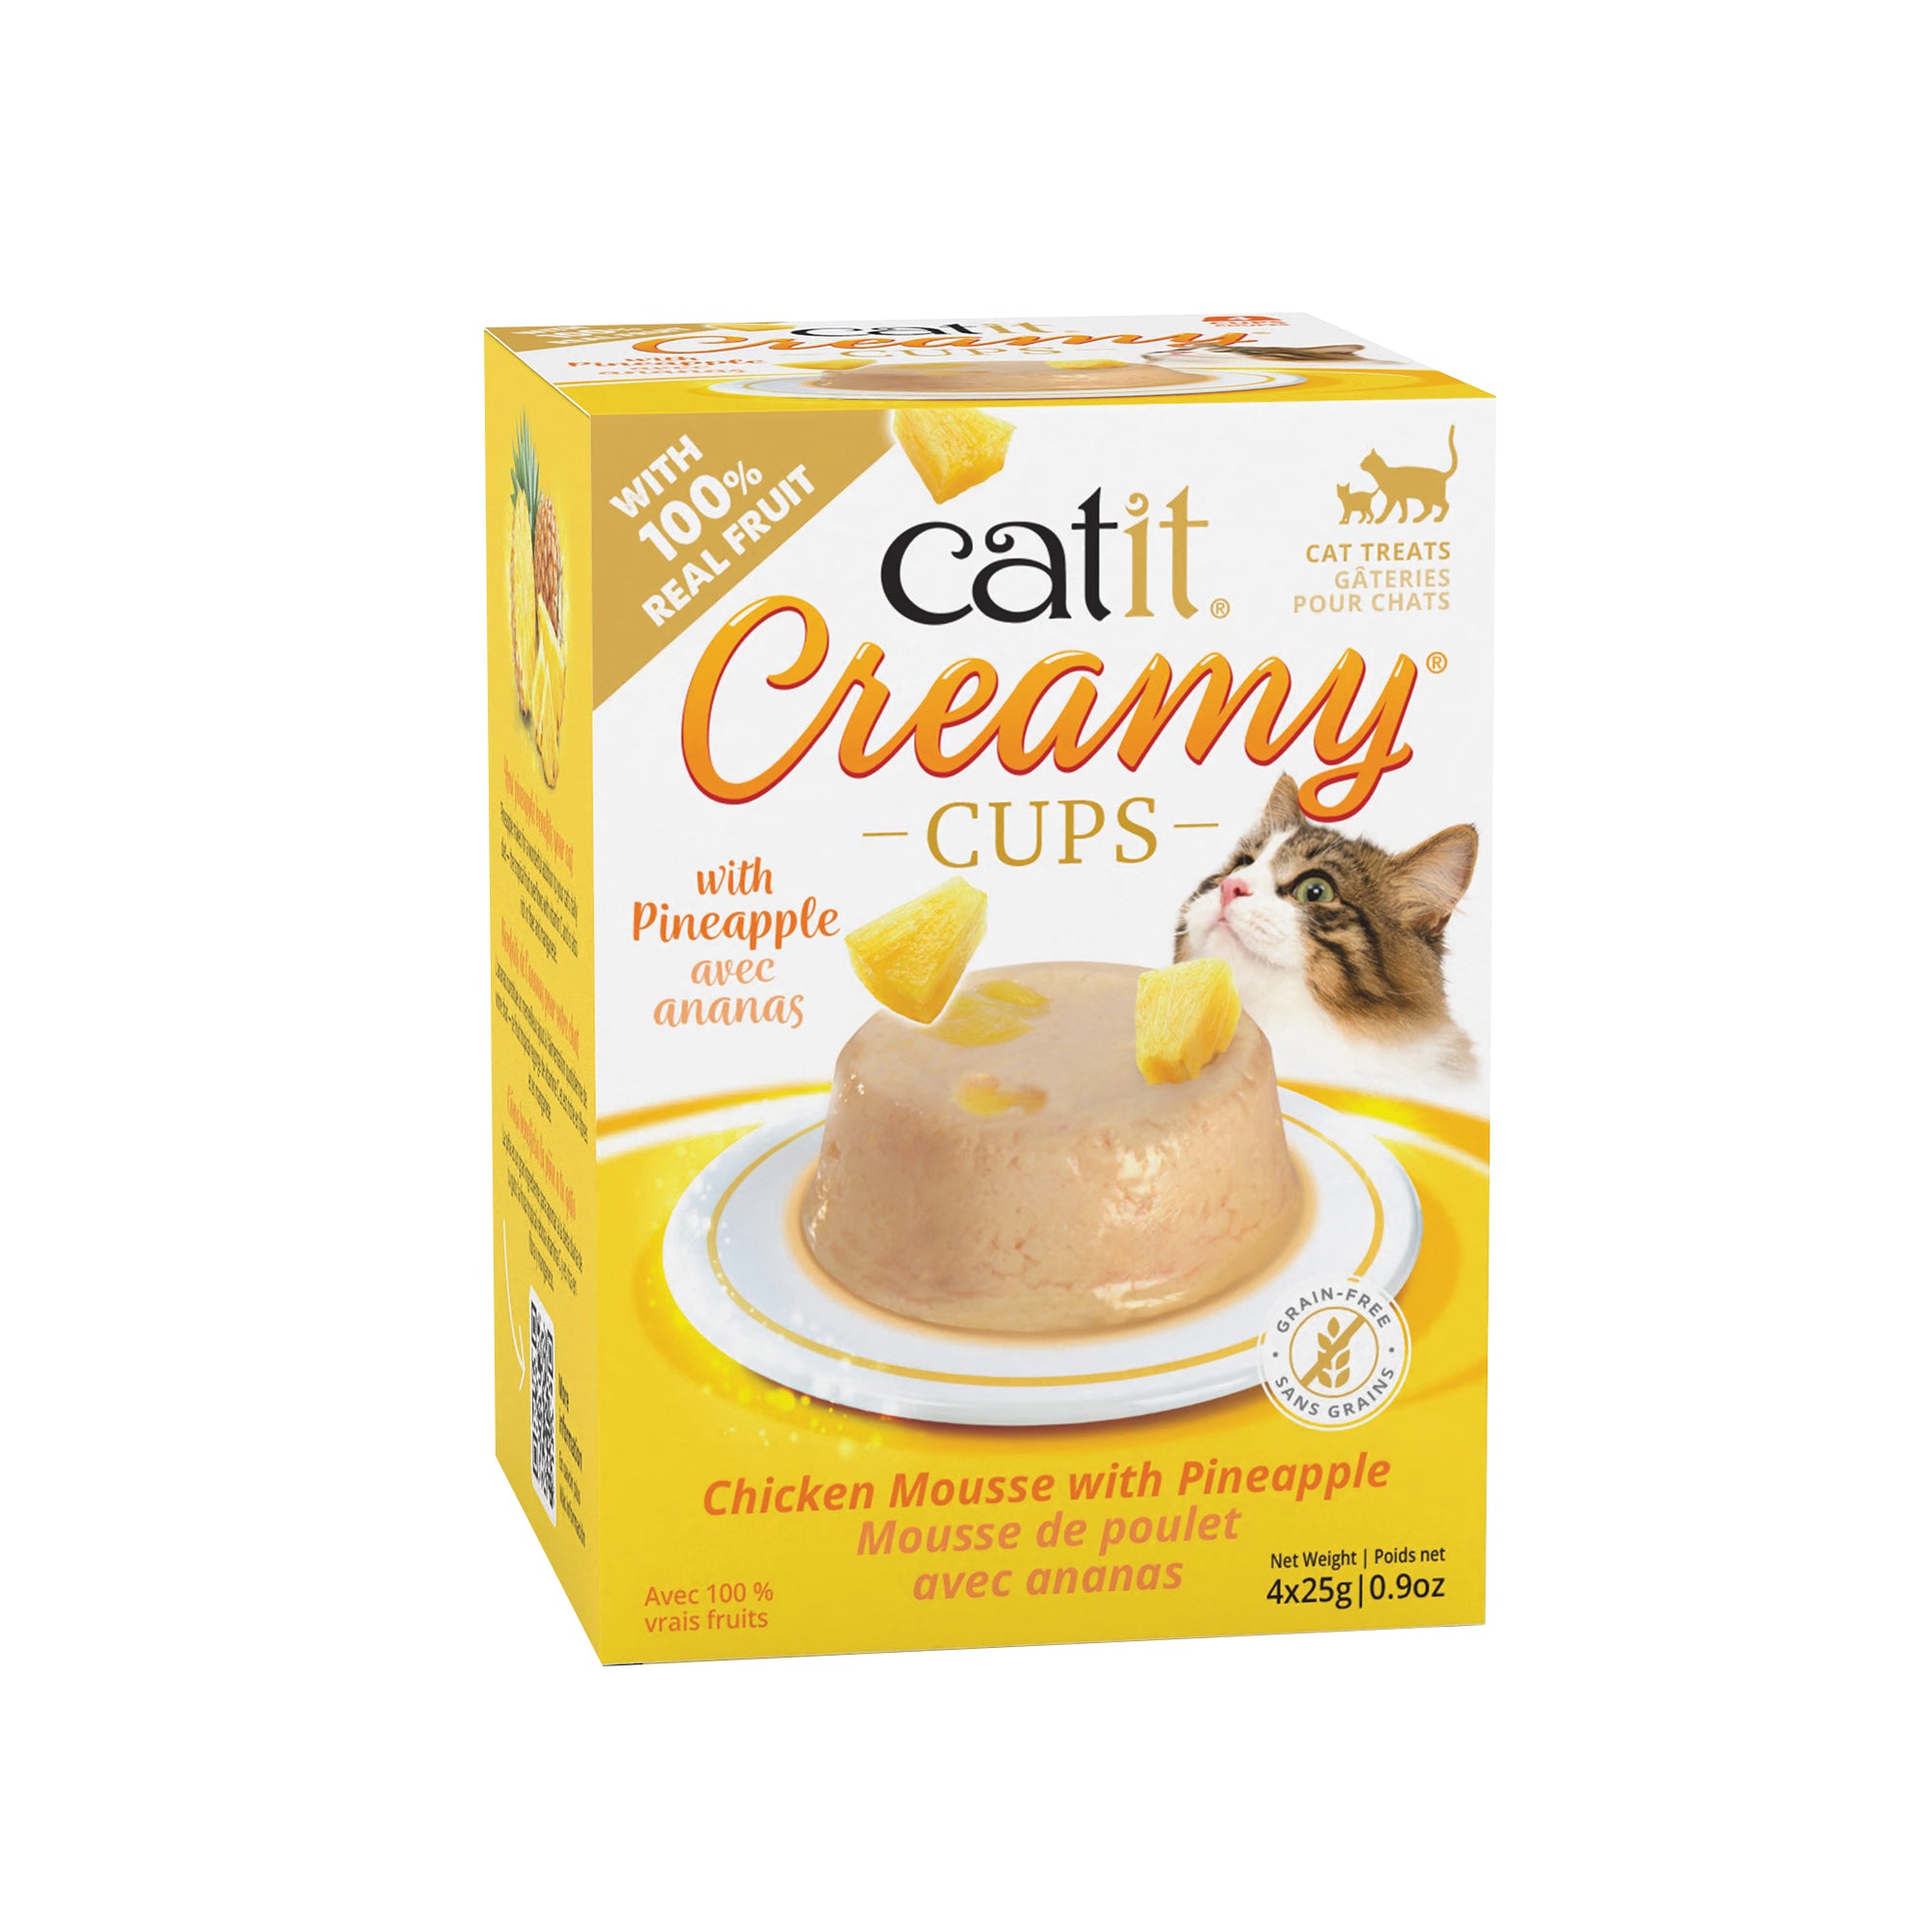 Catit Creamy Cups - Chicken Mousse with Pineapple - 4 x 25g